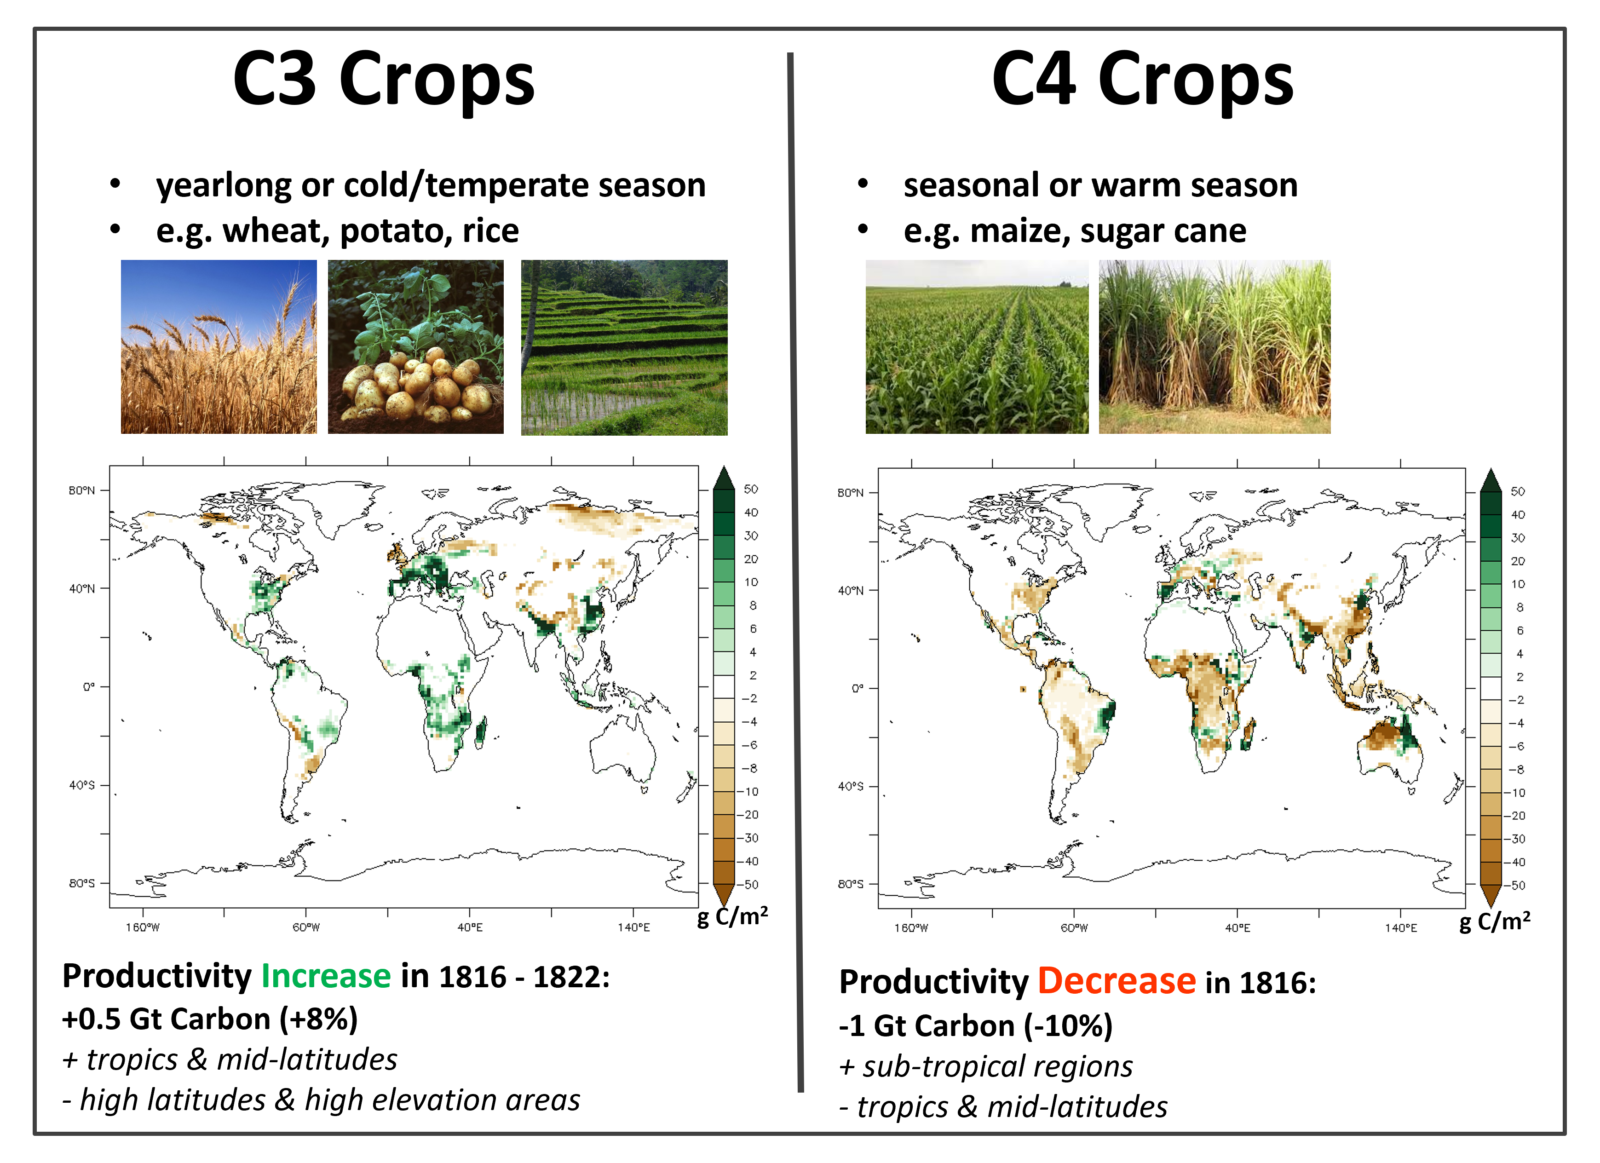 Regional anomalies of the net primary productivity (NPP) of two different types of Crops: C3 (e.g. wheat and potatoes) and C4 (e.g. maize and sugar cane)